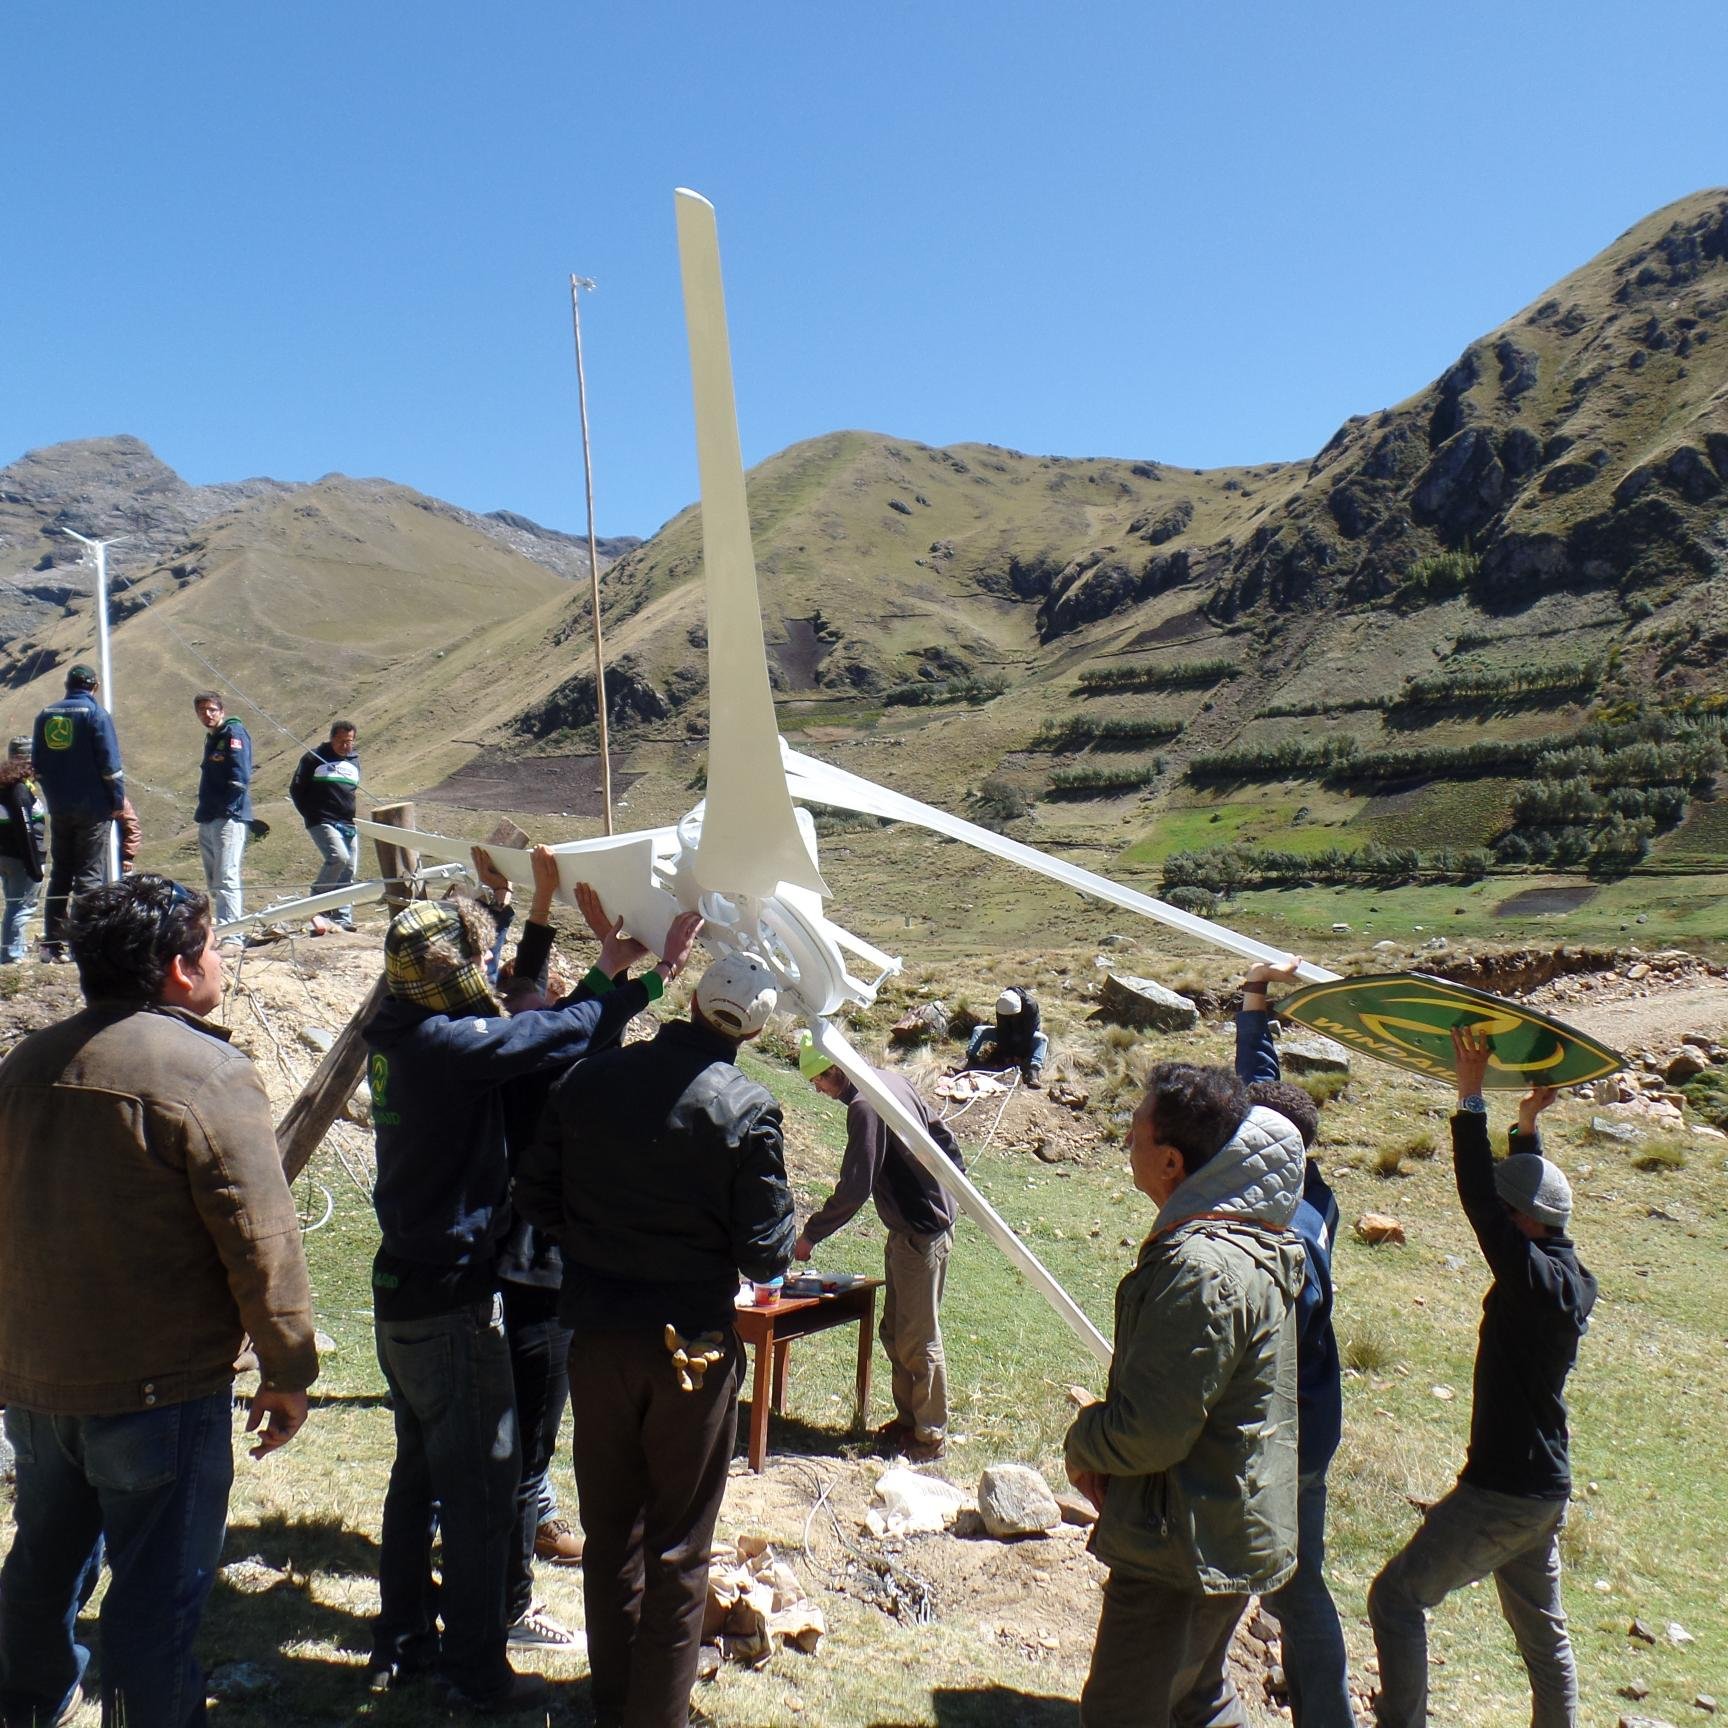 WindAid Institute is an NGO which builds wind turbines with volunteers for communities that have no electricity